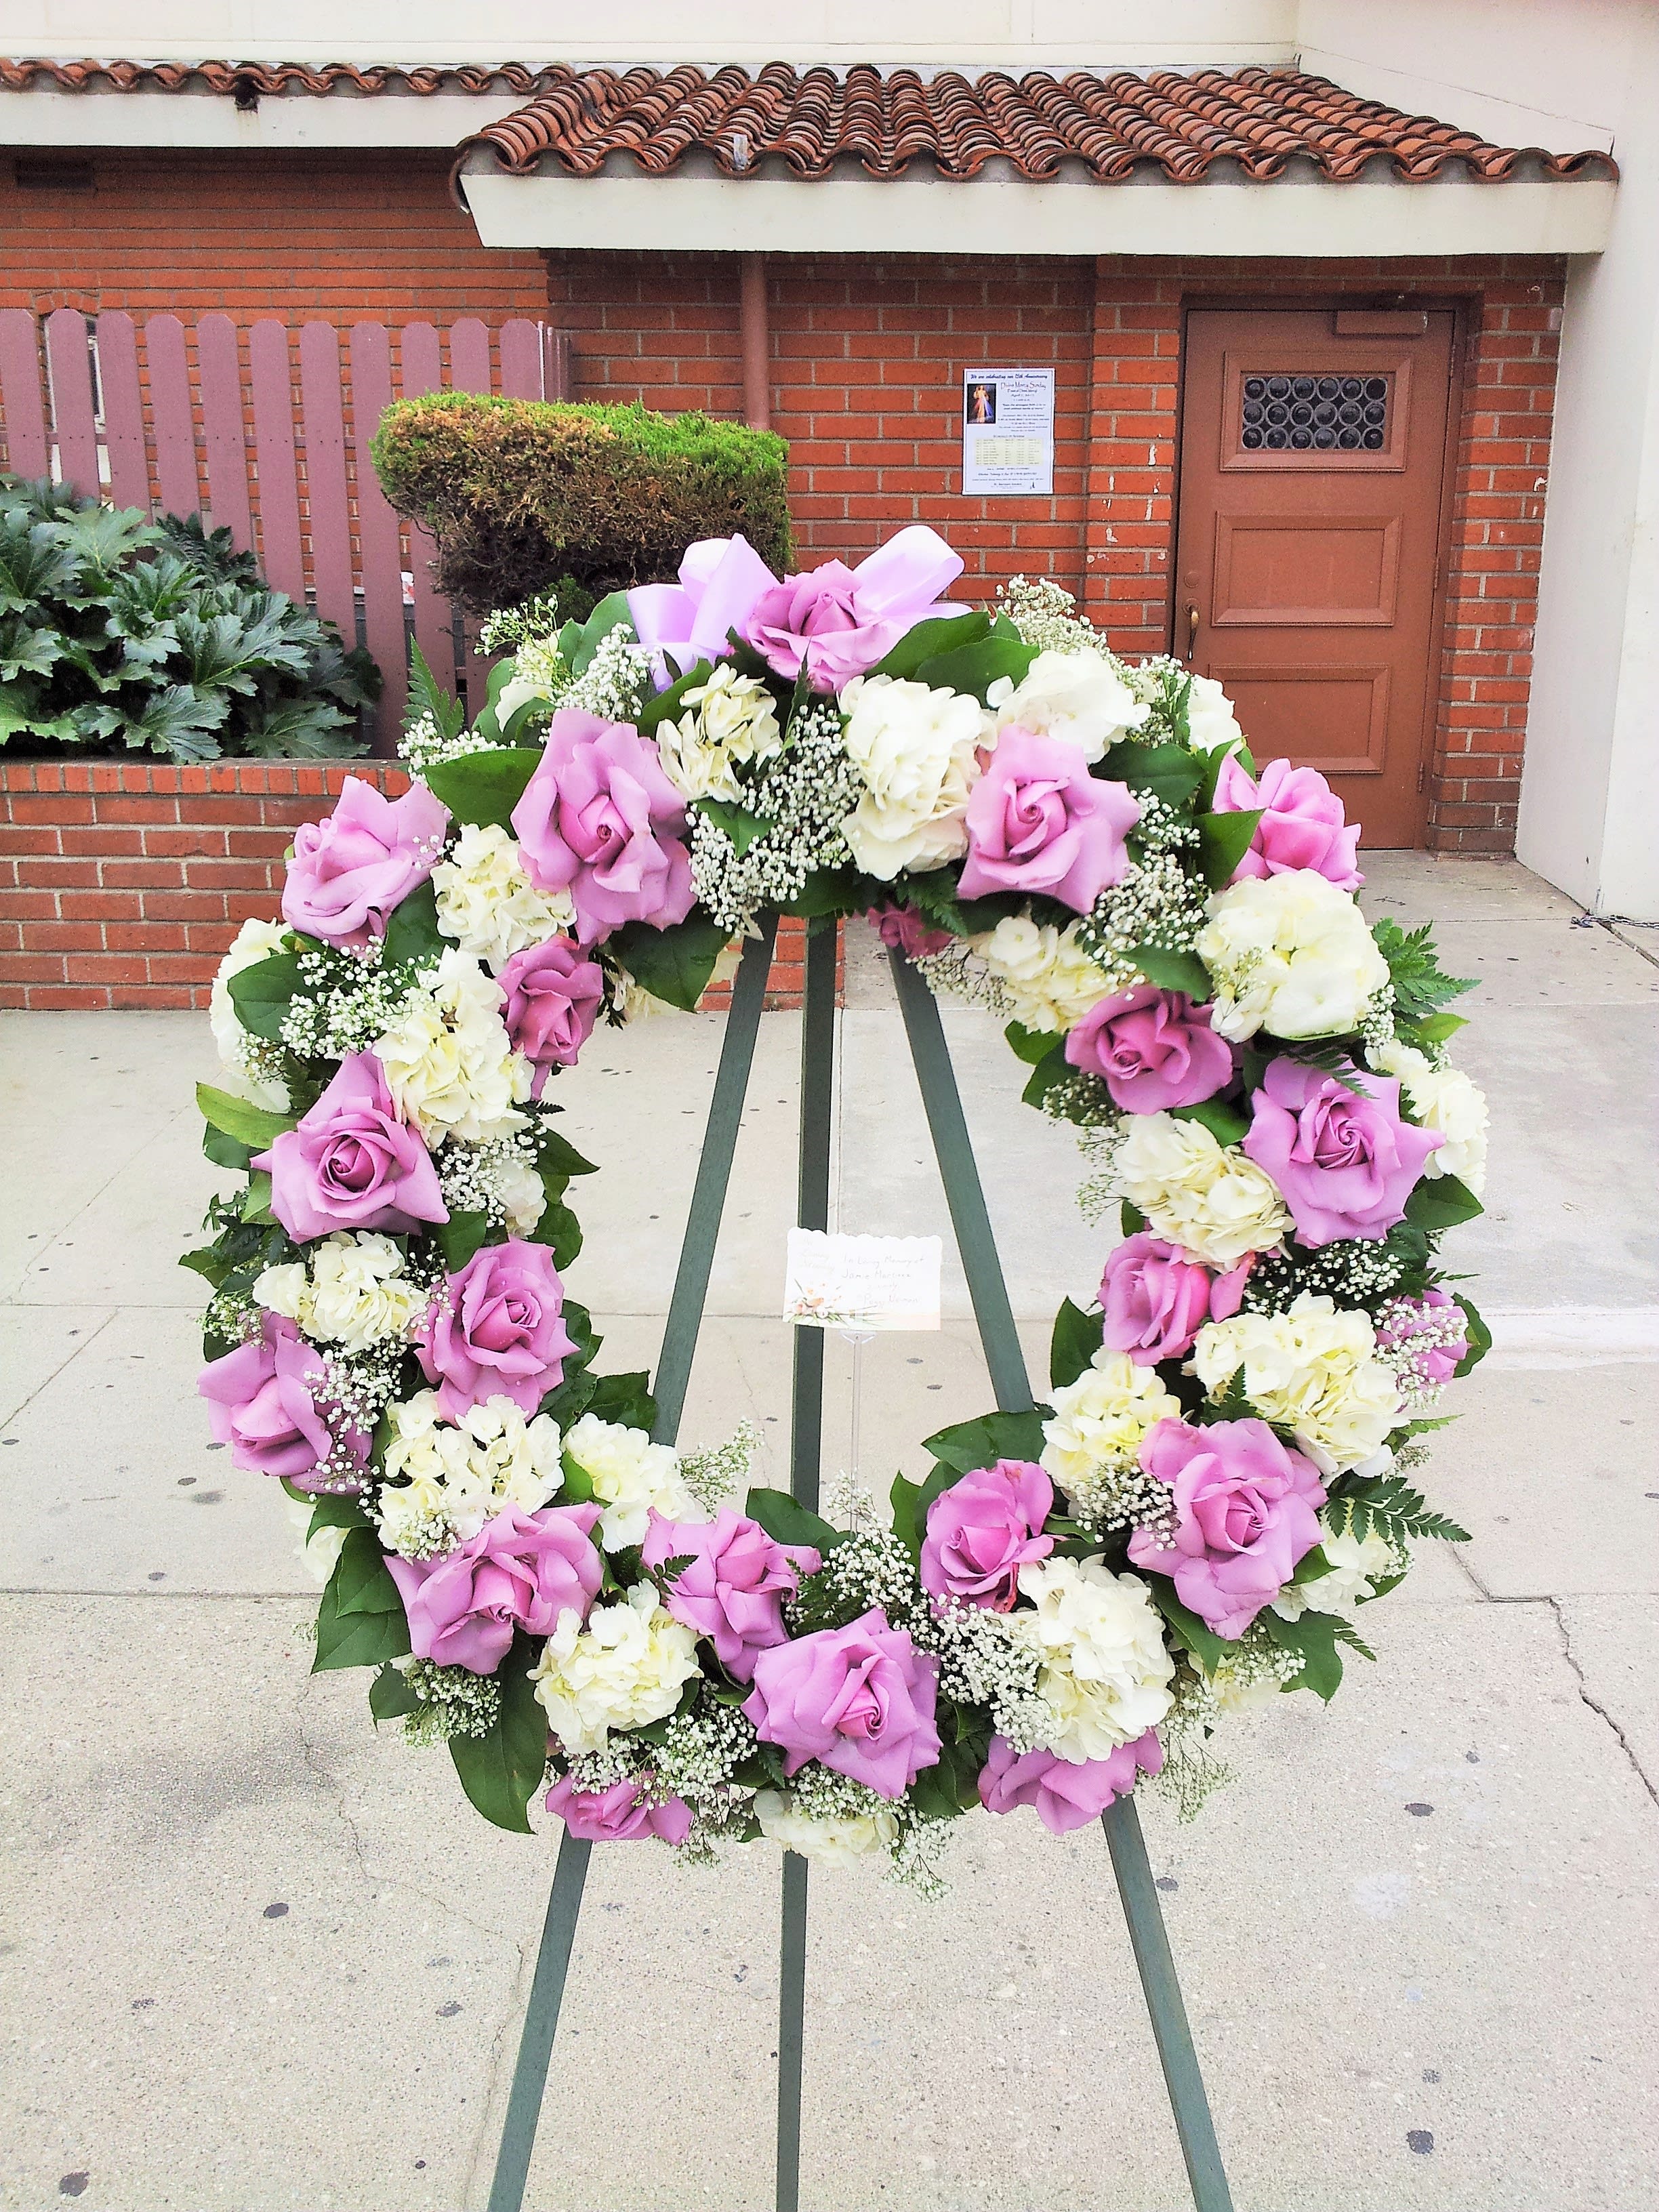 Sympathy Wreath - 24&quot; wreath filled with roses and hydrangea.  Sympathy arrangements require more prep time, please place your order at least 5 hours prior to start of viewing or service.  For optimal quality, we recommend placing your order with a minimum of one day's notice.